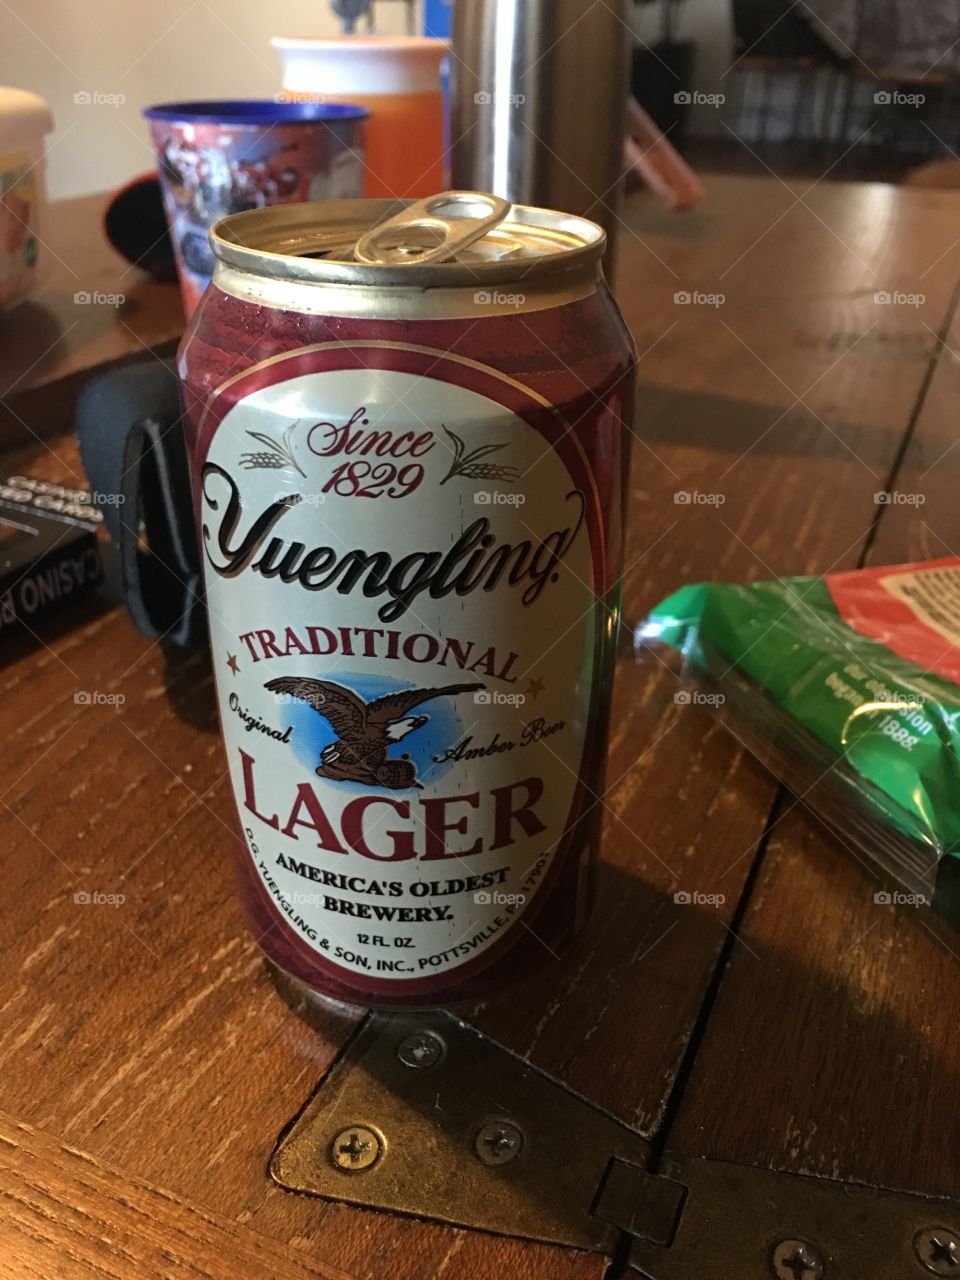 A can of Yuengling beer